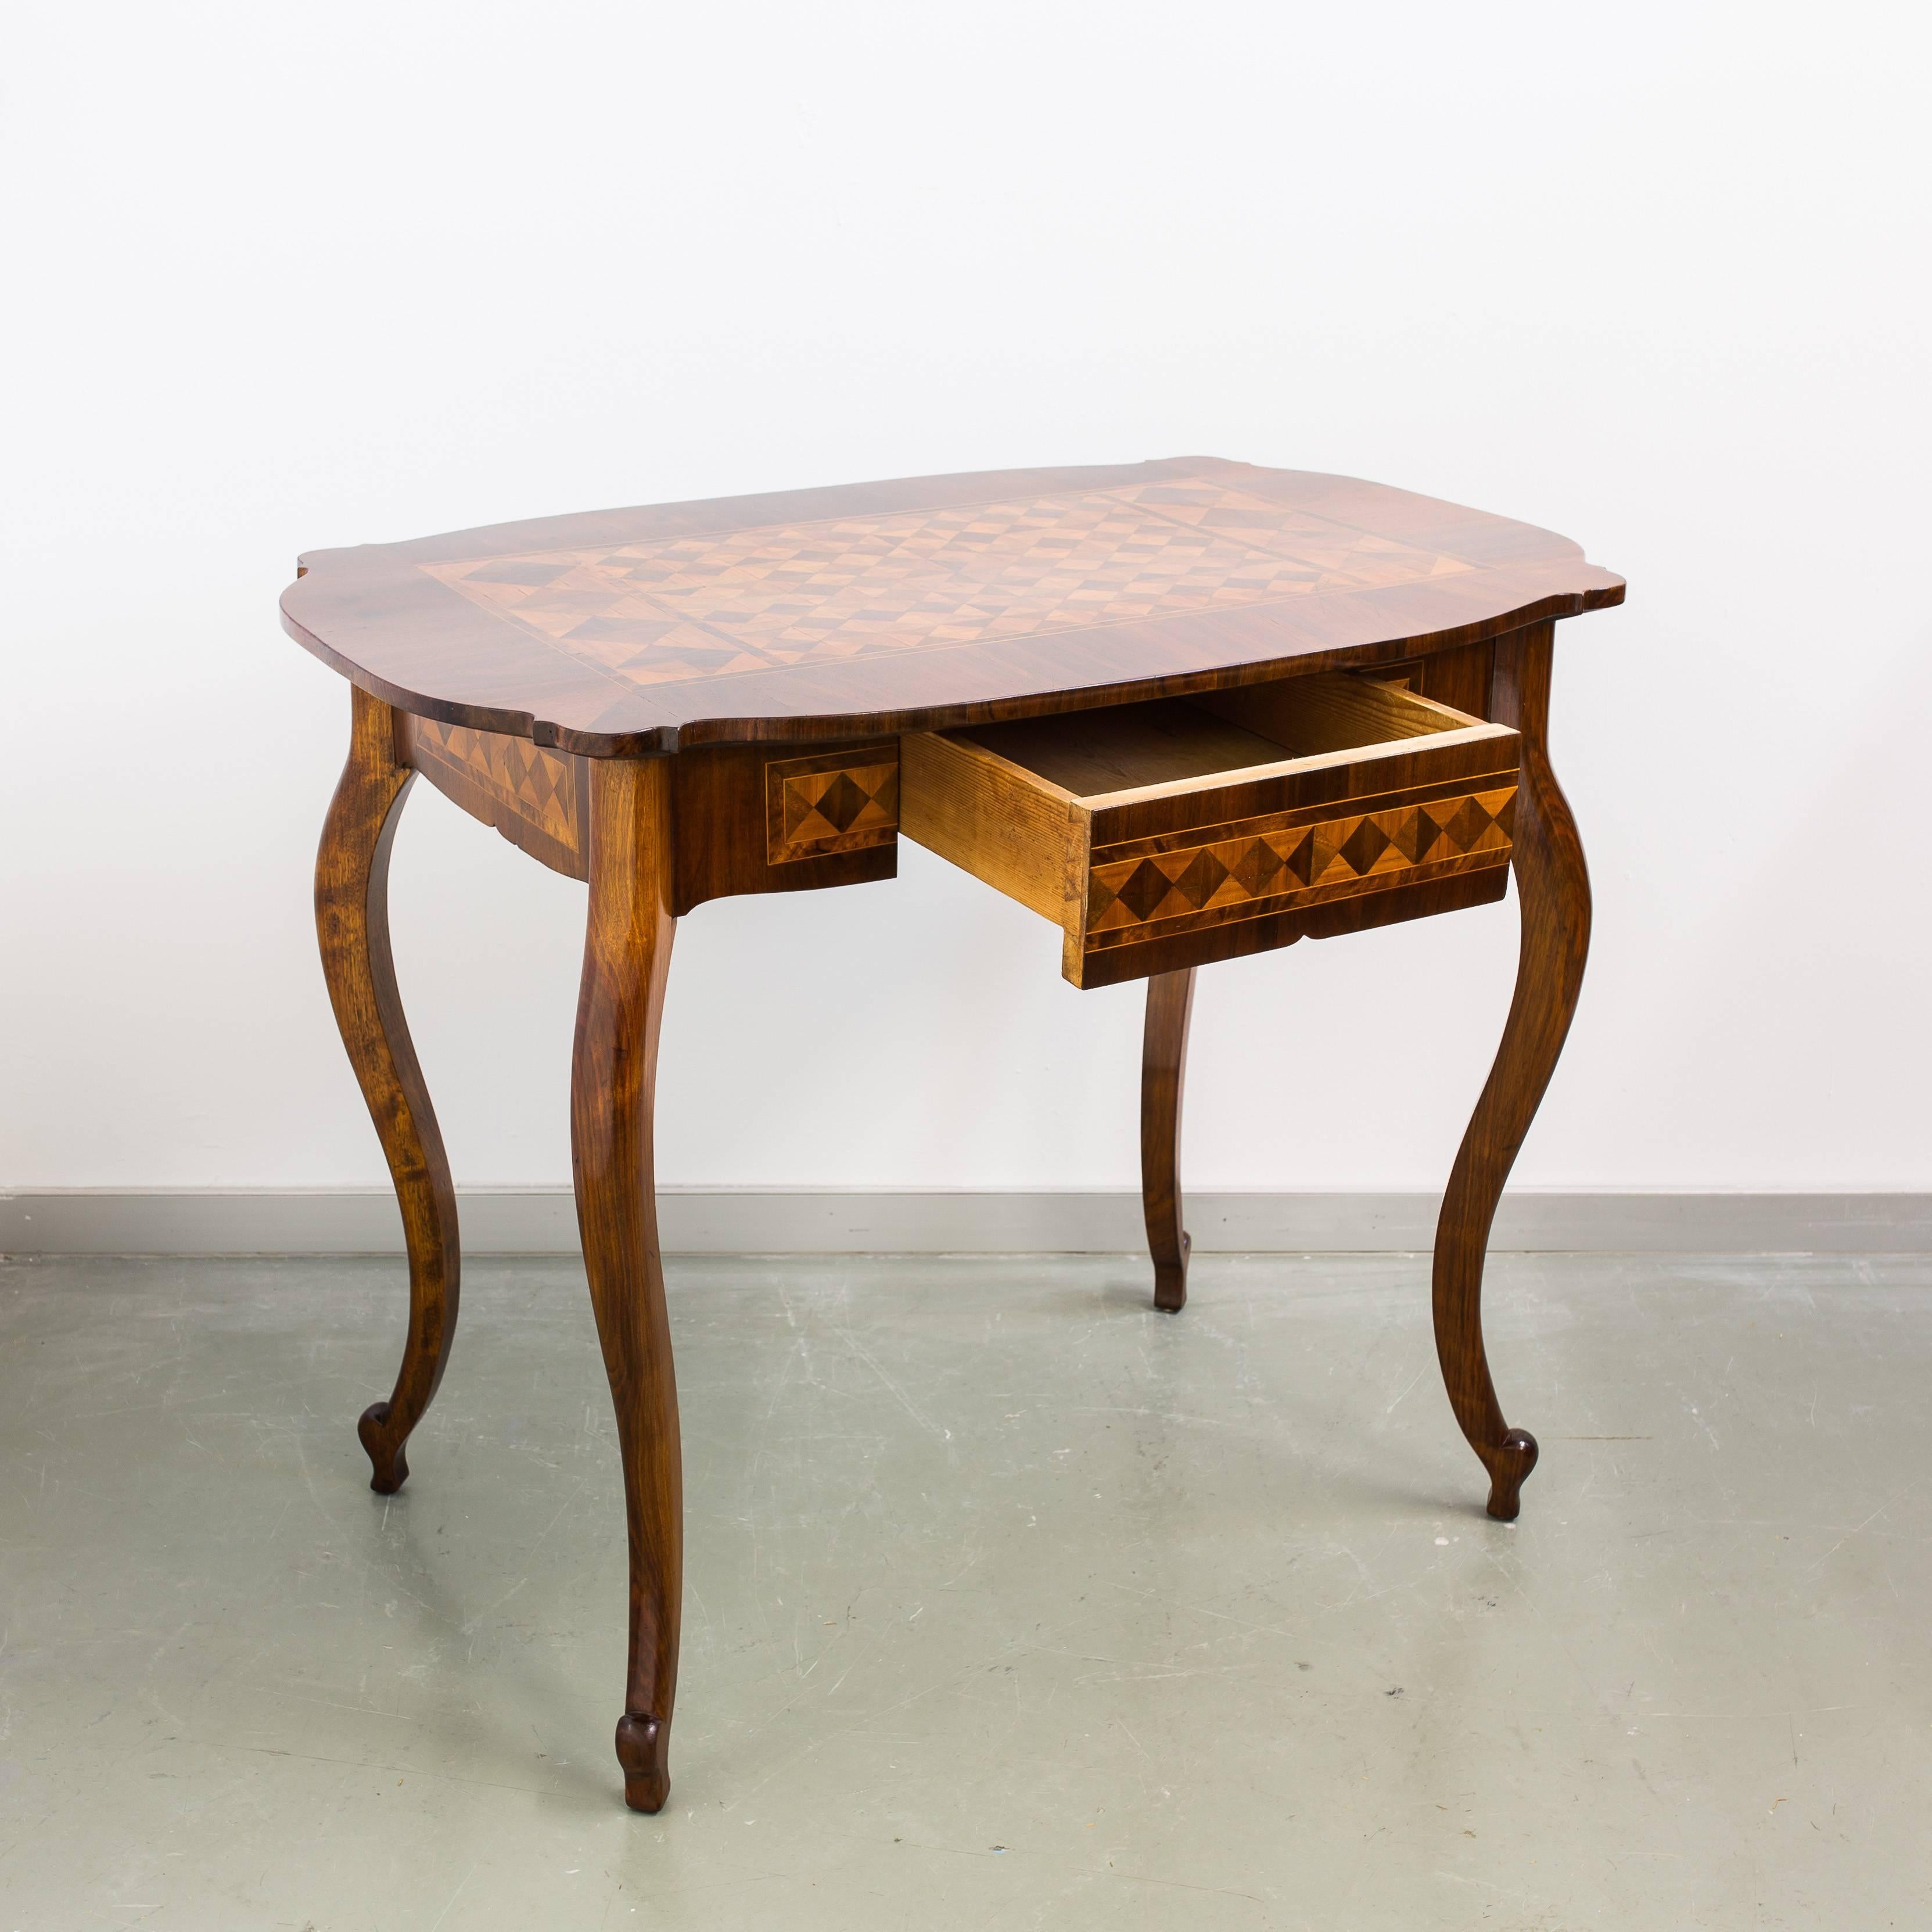 Lovely shaped 19th century Marquetry table with drawer from the Baroque Revival period in Austria, circa 1850. Slender legs made of solid walnut wood, a wonderful marquetry work on the tabletop and each side framed by thin maple threads, makes this